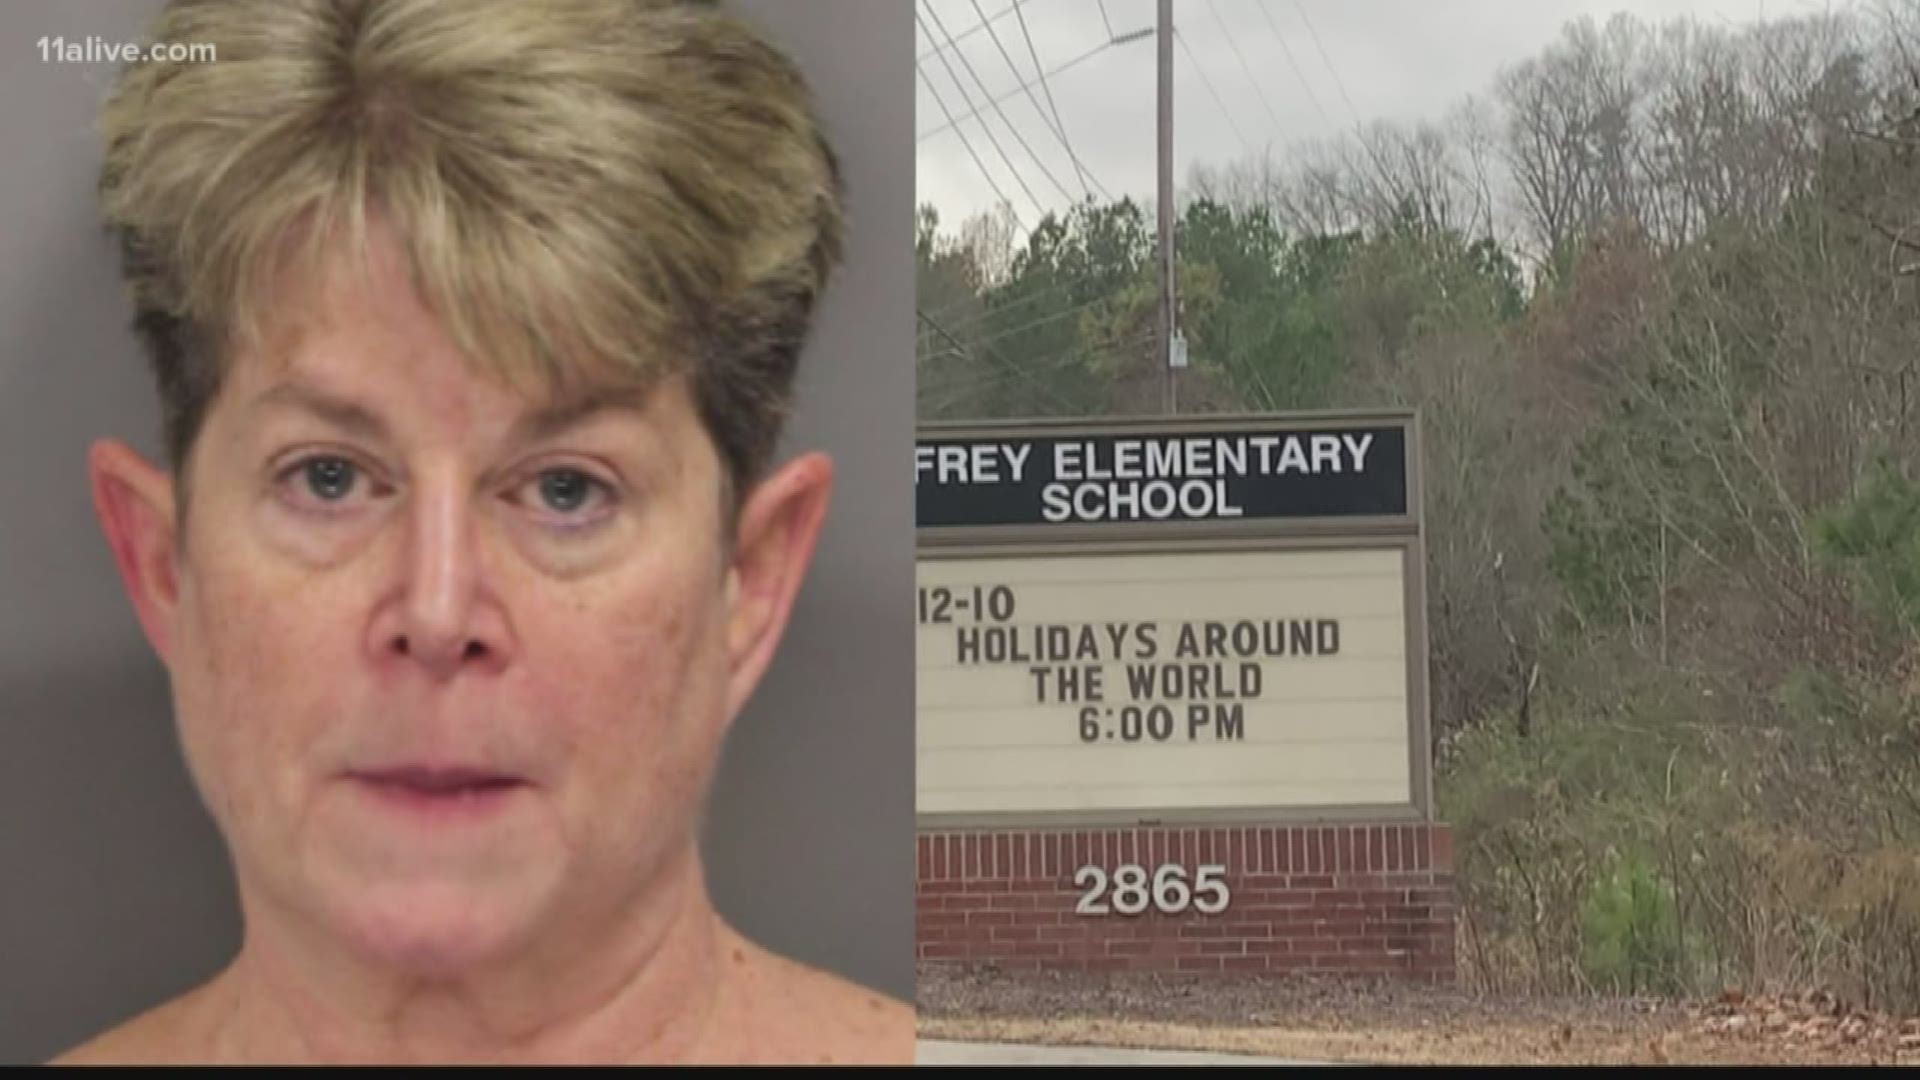 The incident occurred last month at Frey Elementary School in Acworth.